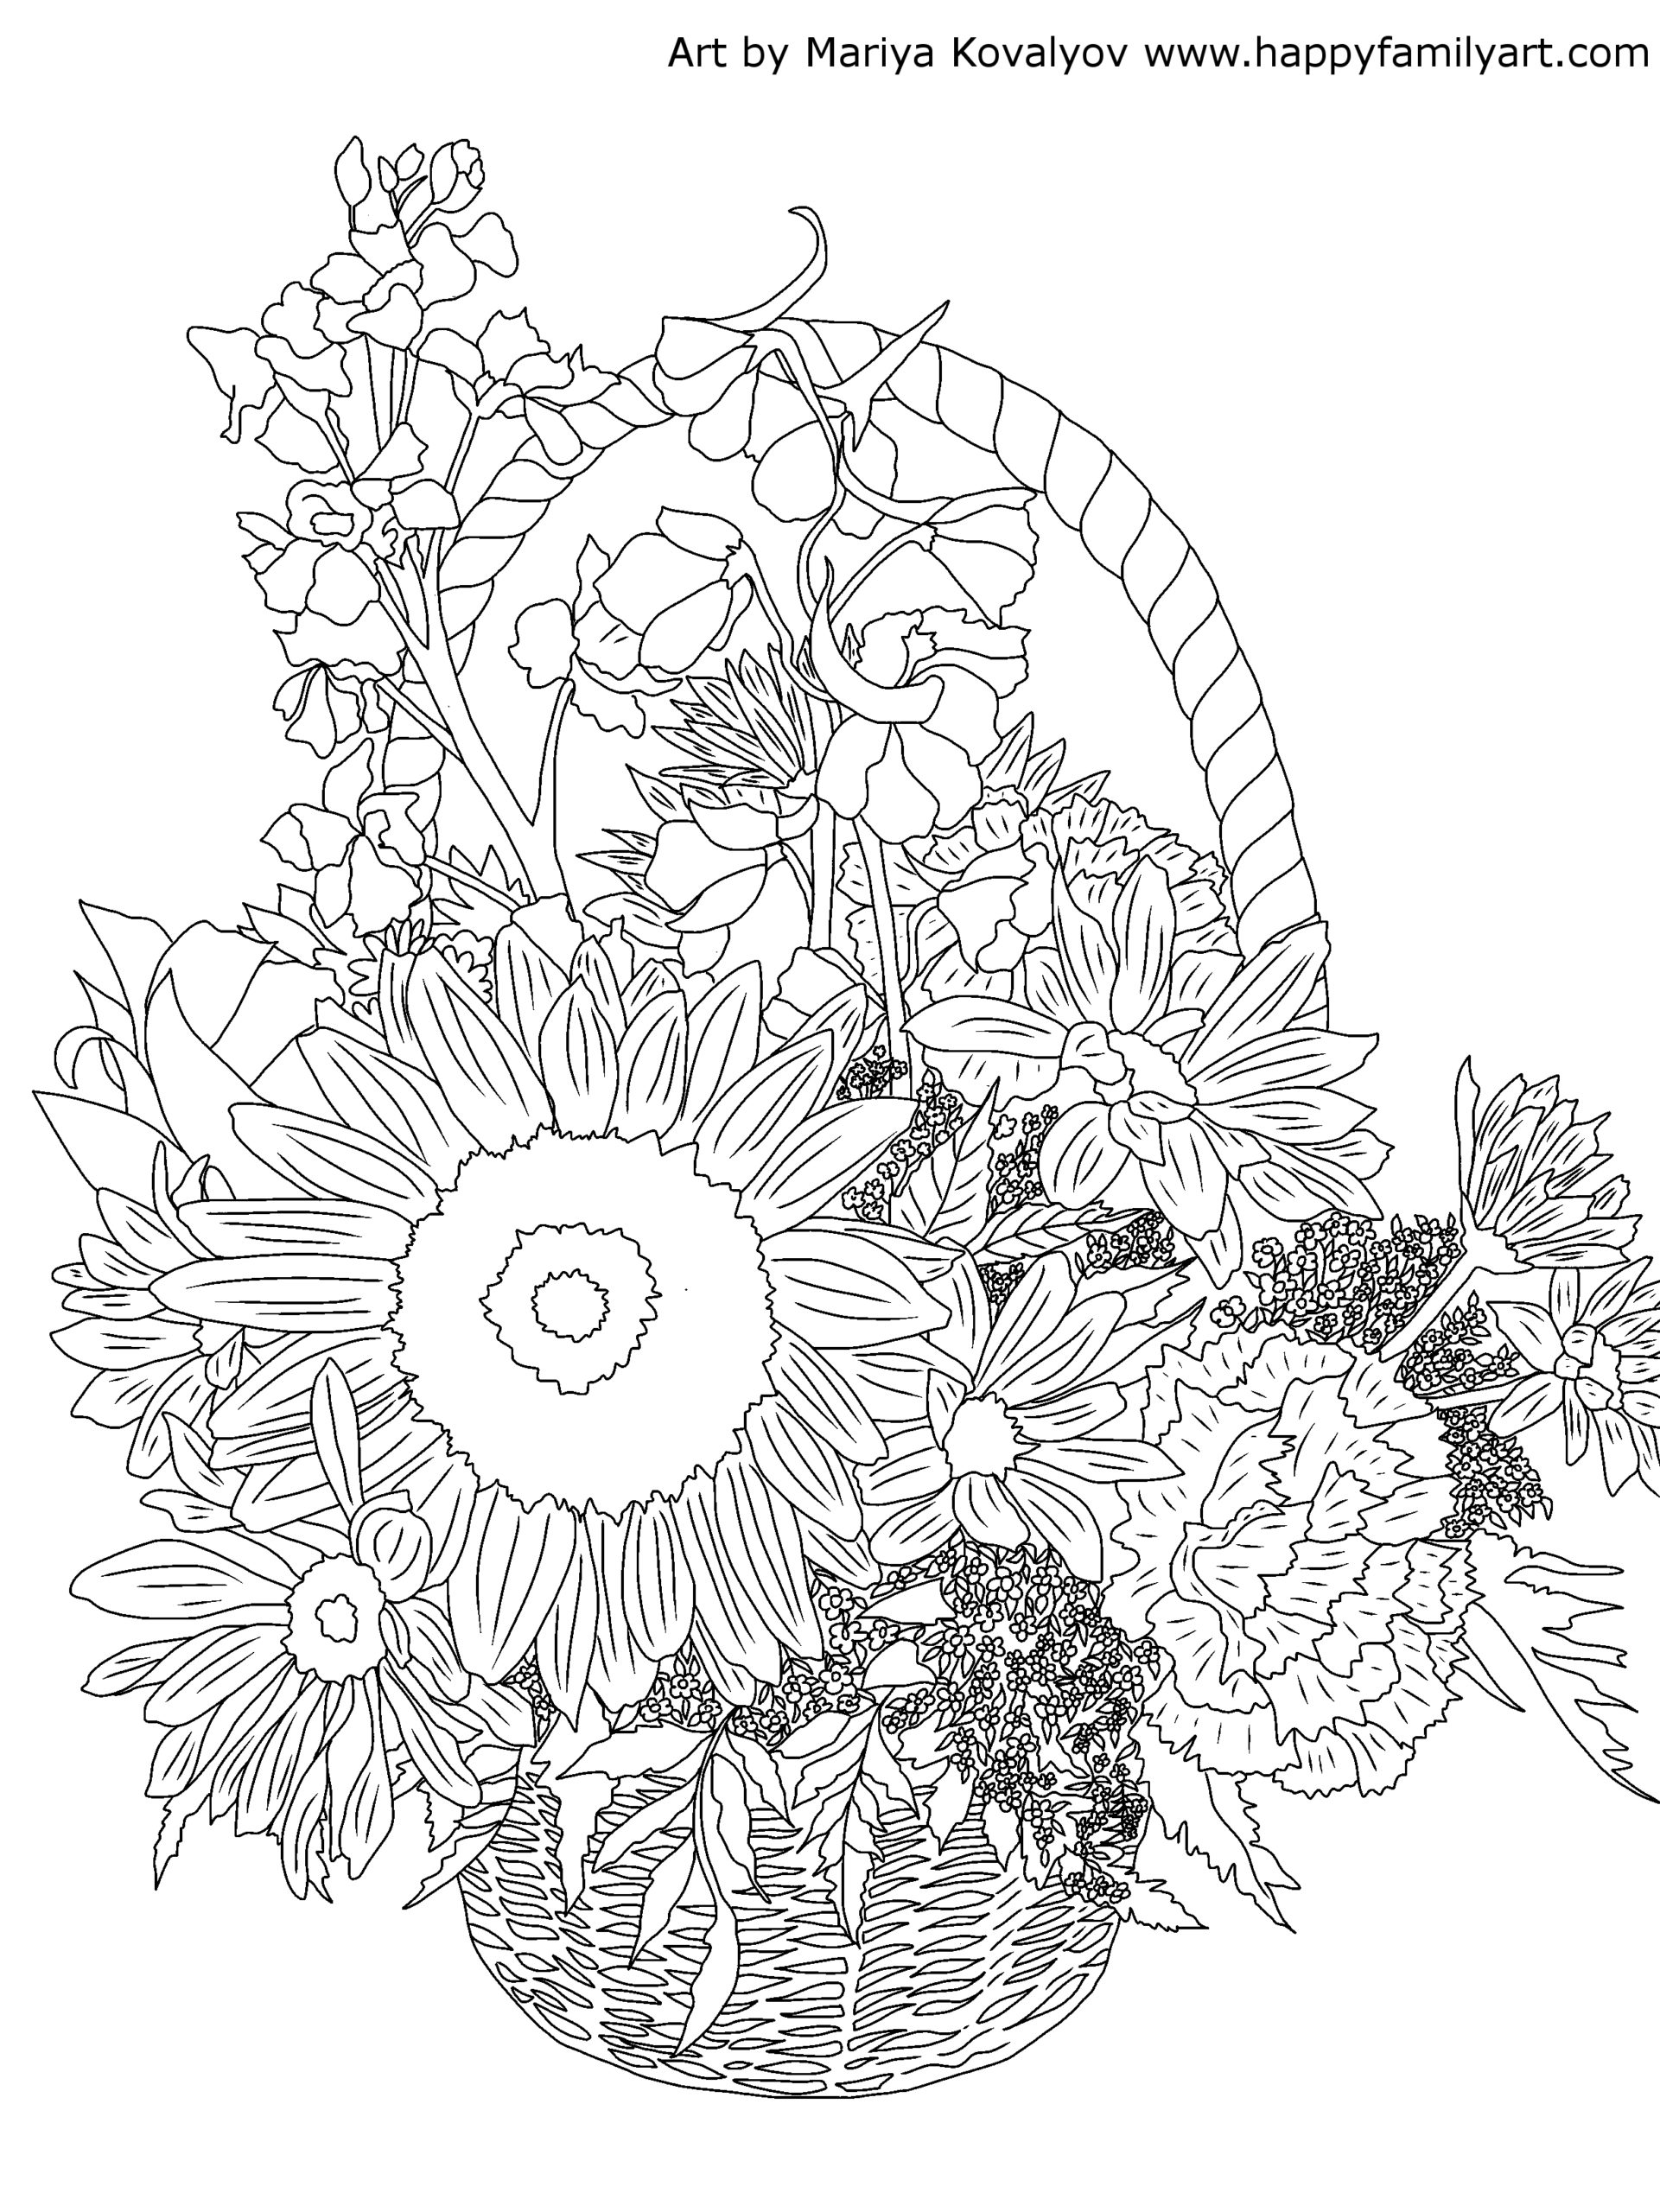 Basket of Flowers Coloring Page